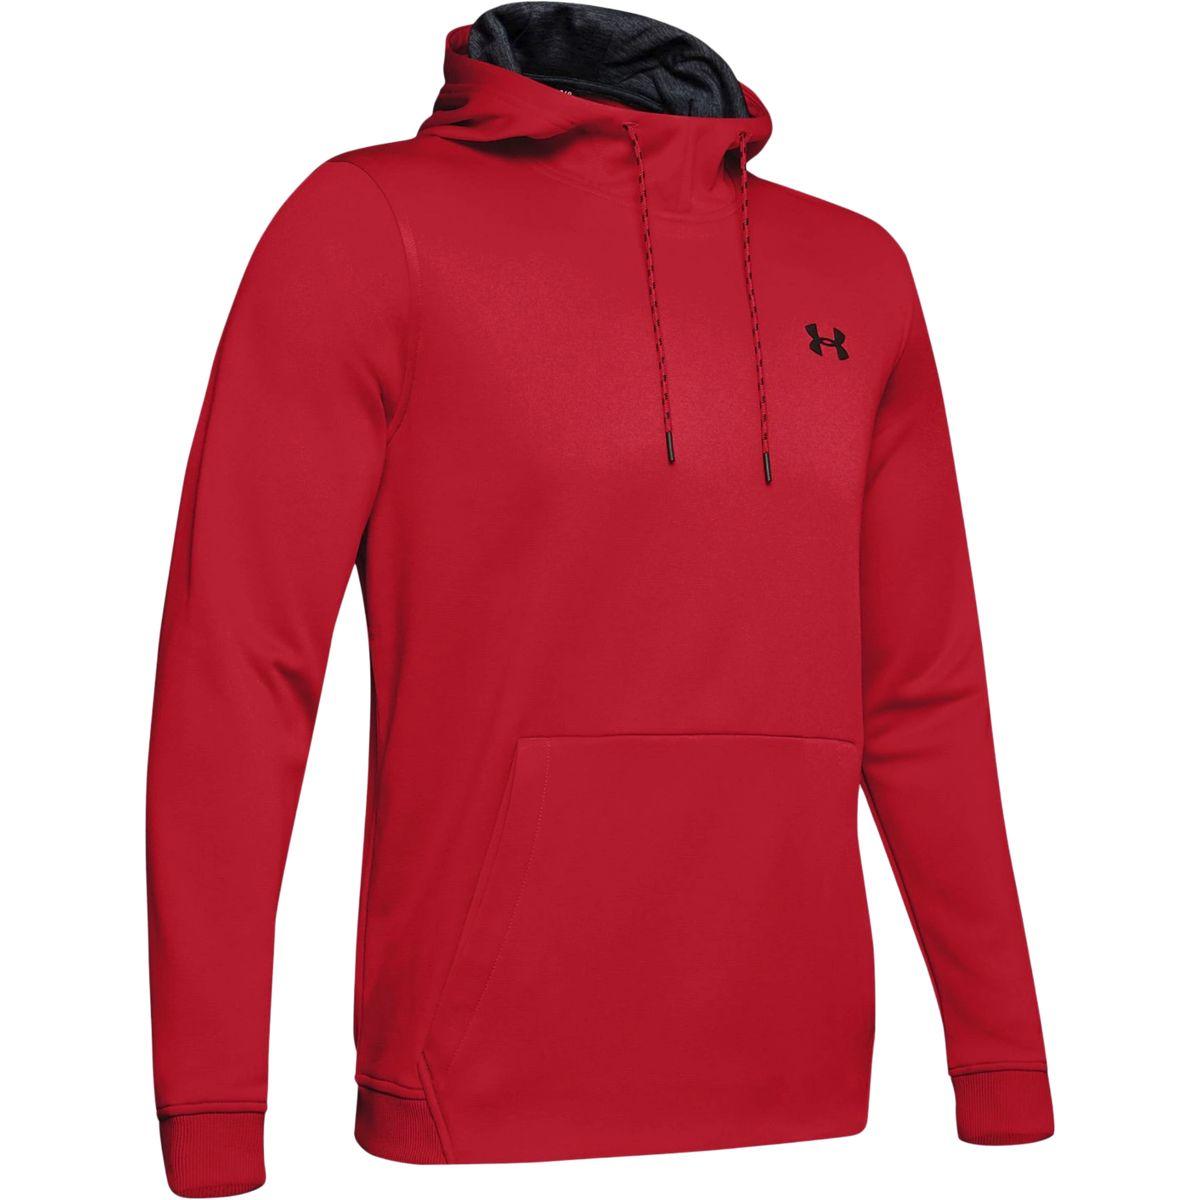 Under Armour Armour Fleece Pullover Hoodie in Red/Black (Red) for Men ...